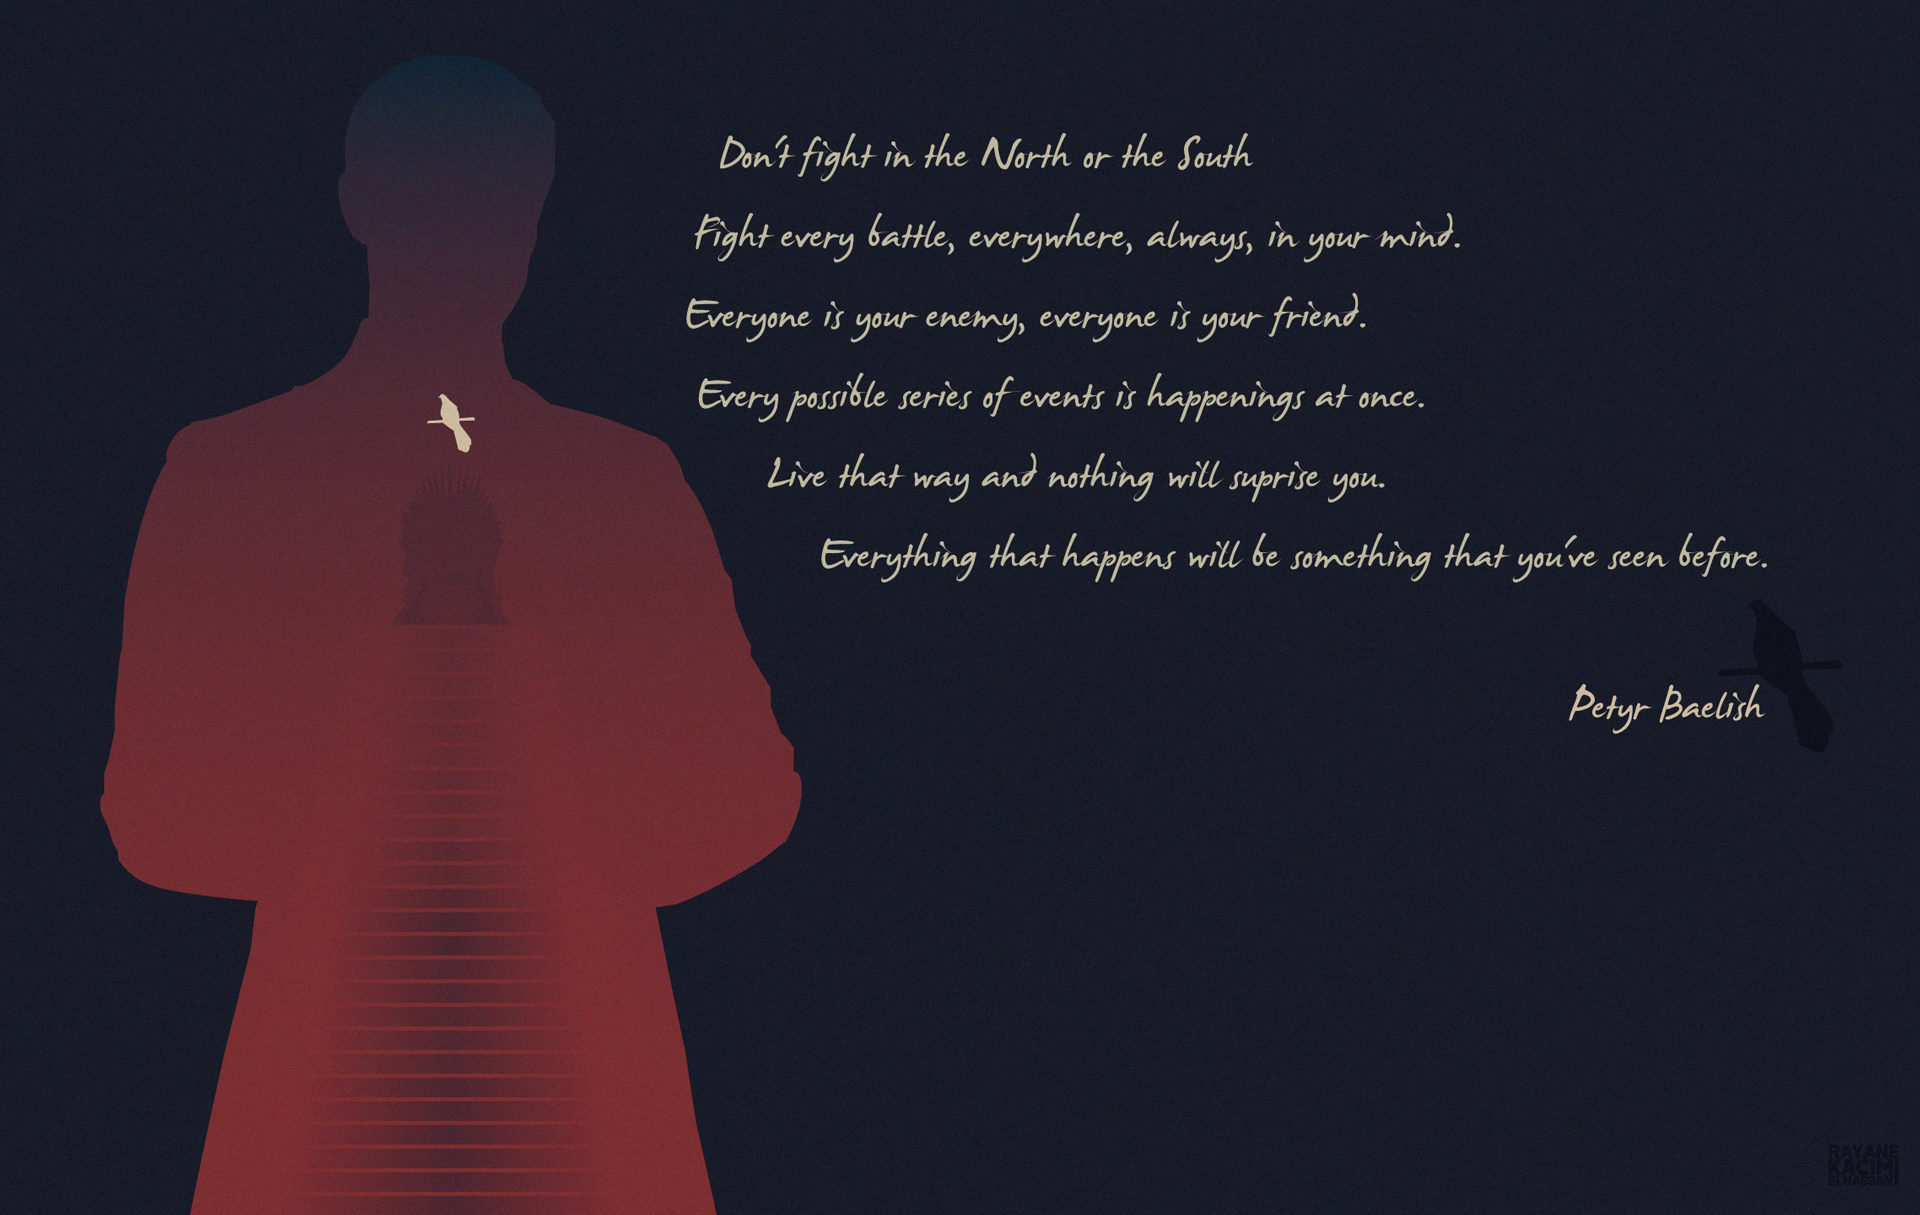 S7E3] Petyr Baelish gave me chills with this quote so i made a 1920x1215